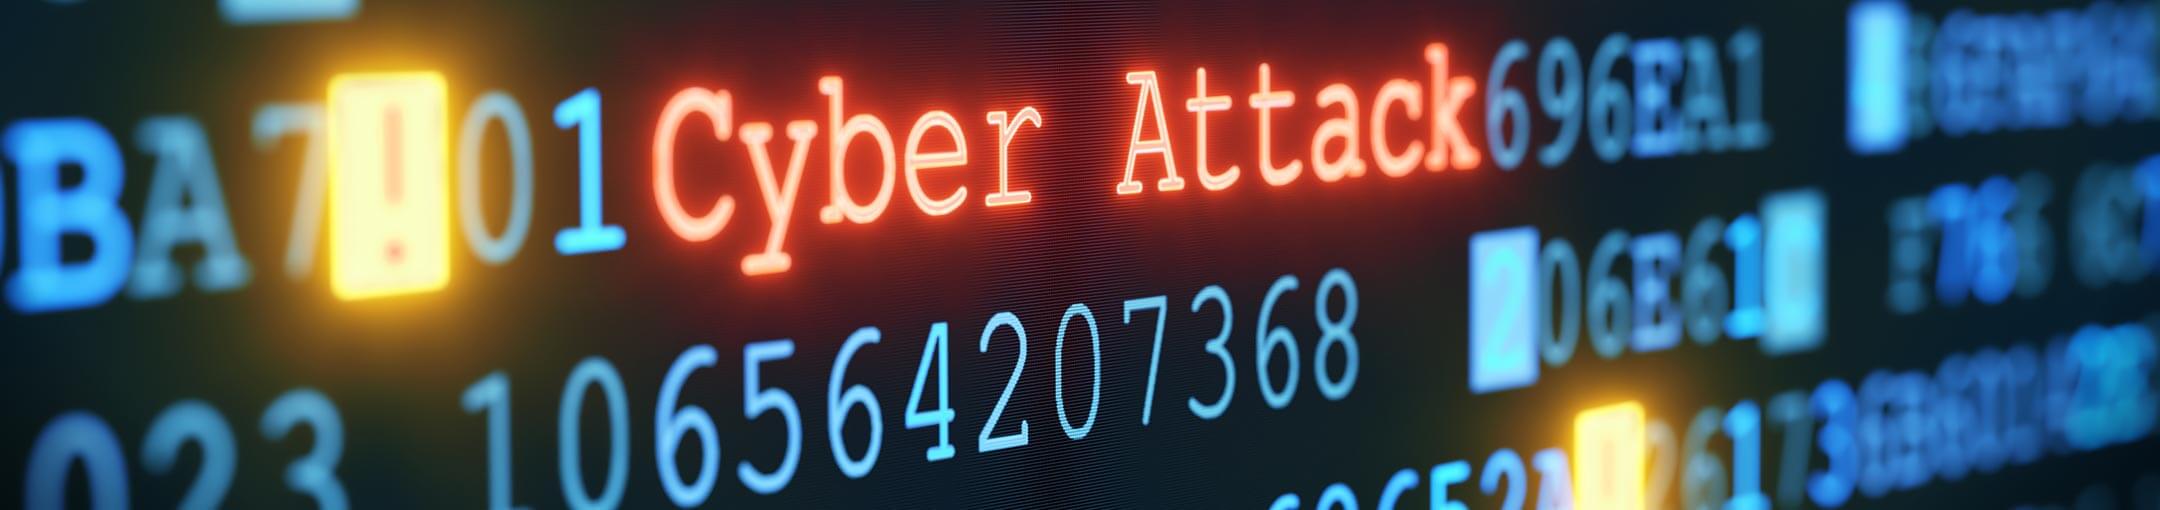 The words Cyber Attack appears in red on a screen of other blue text and numbers.